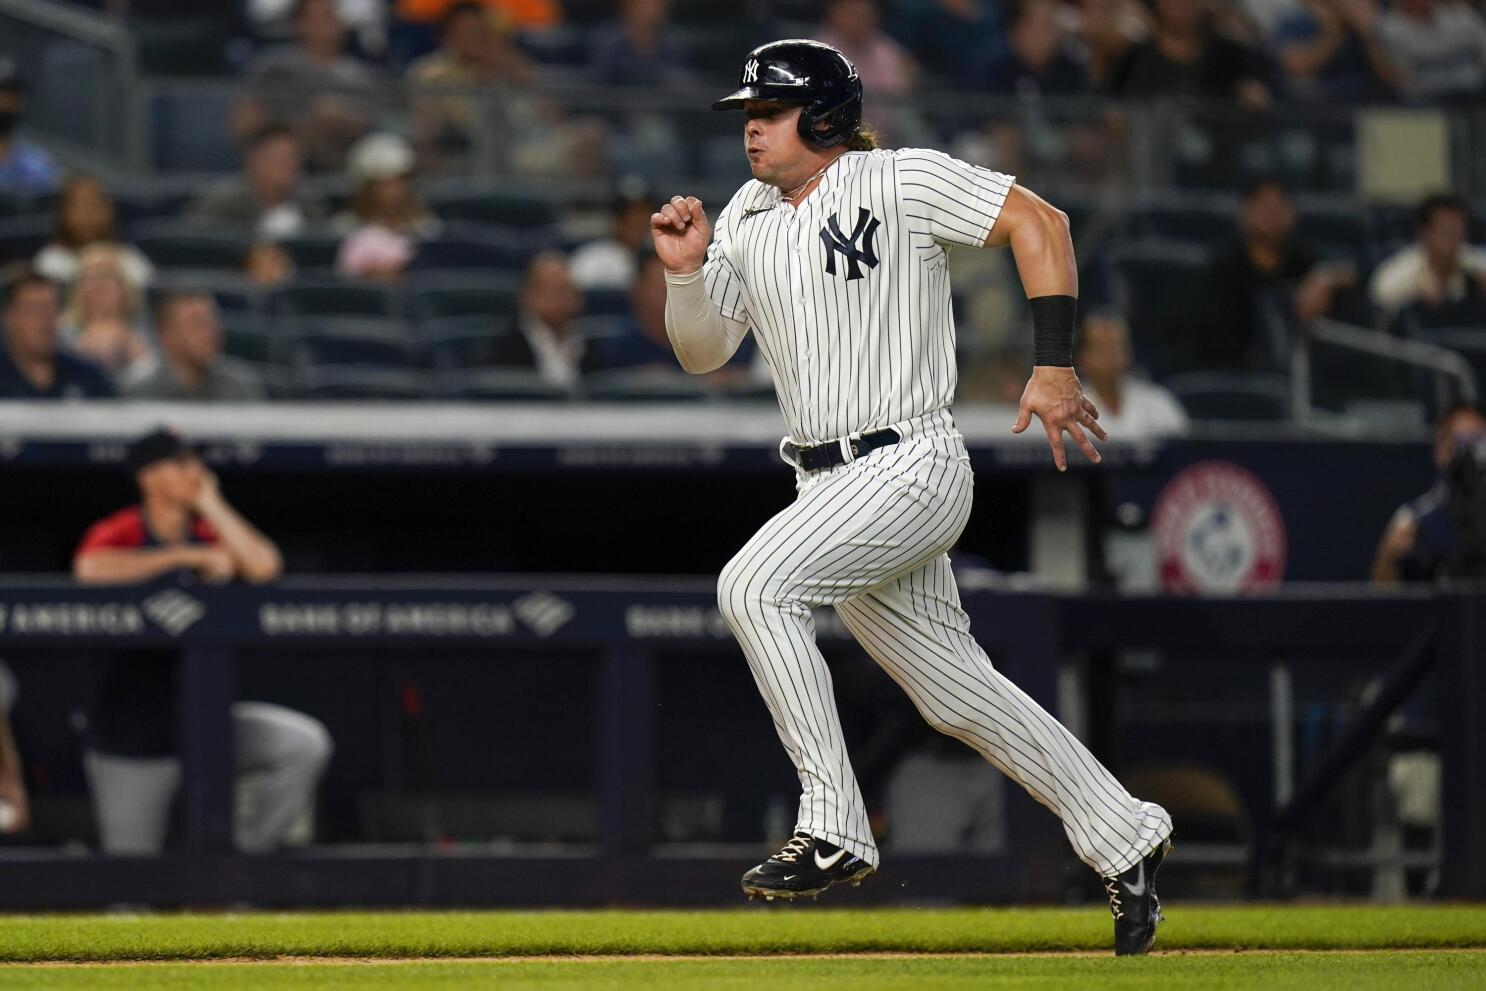 Luke Voit starts rehab assignment, could rejoin Yankees next week